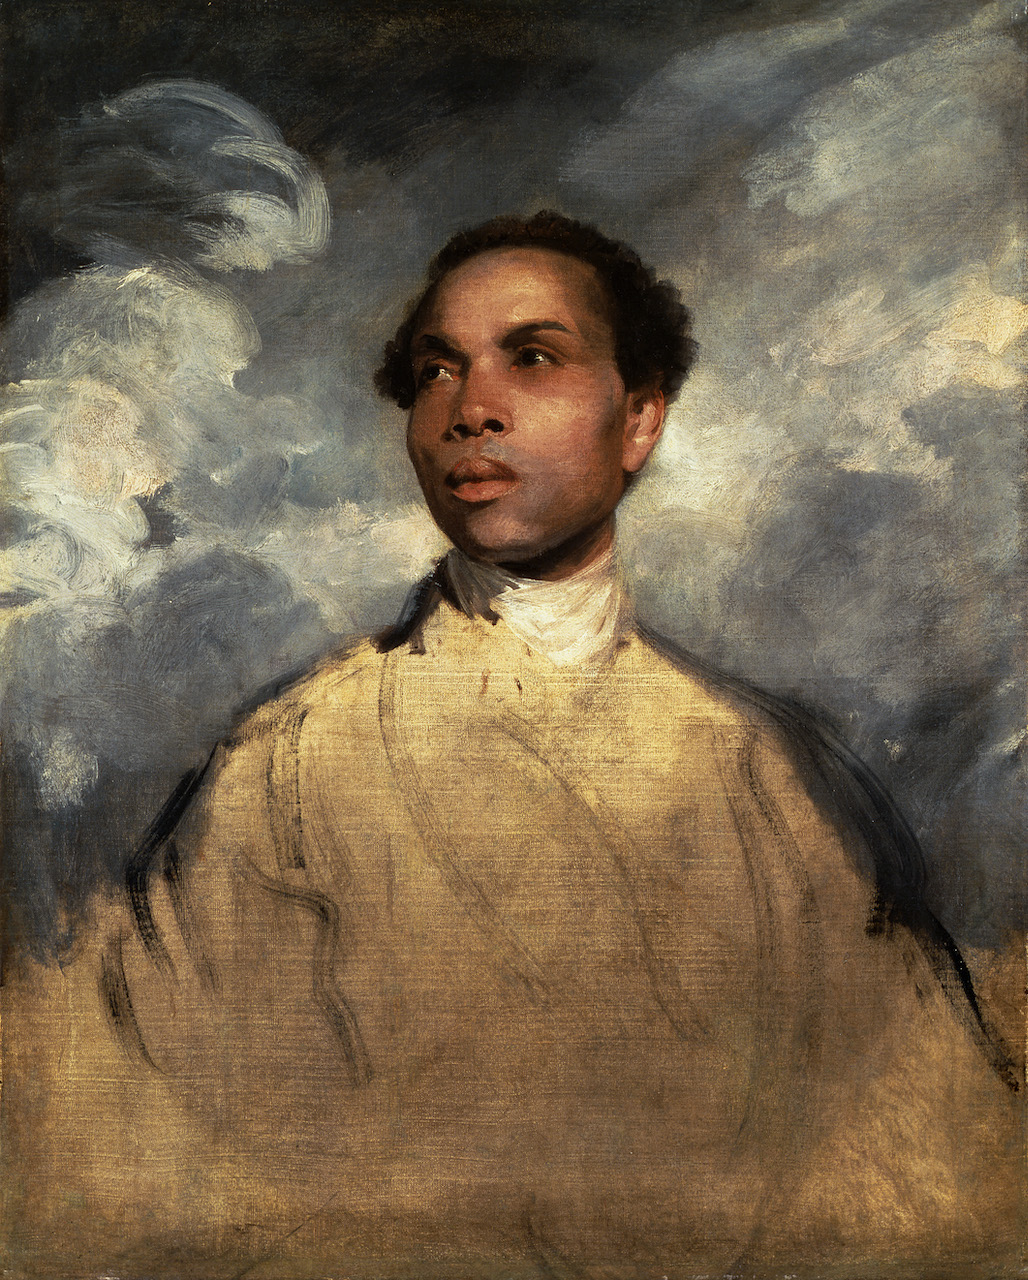 The Wick - Sir Joshua Reynolds PRA, Portrait of a Man, probably Francis Barber, c. 1770
Oil on canvas, 78.7 x 63.8 cm
The Menil Collection, Houston
Photo © Hickey-Robertson, Houston